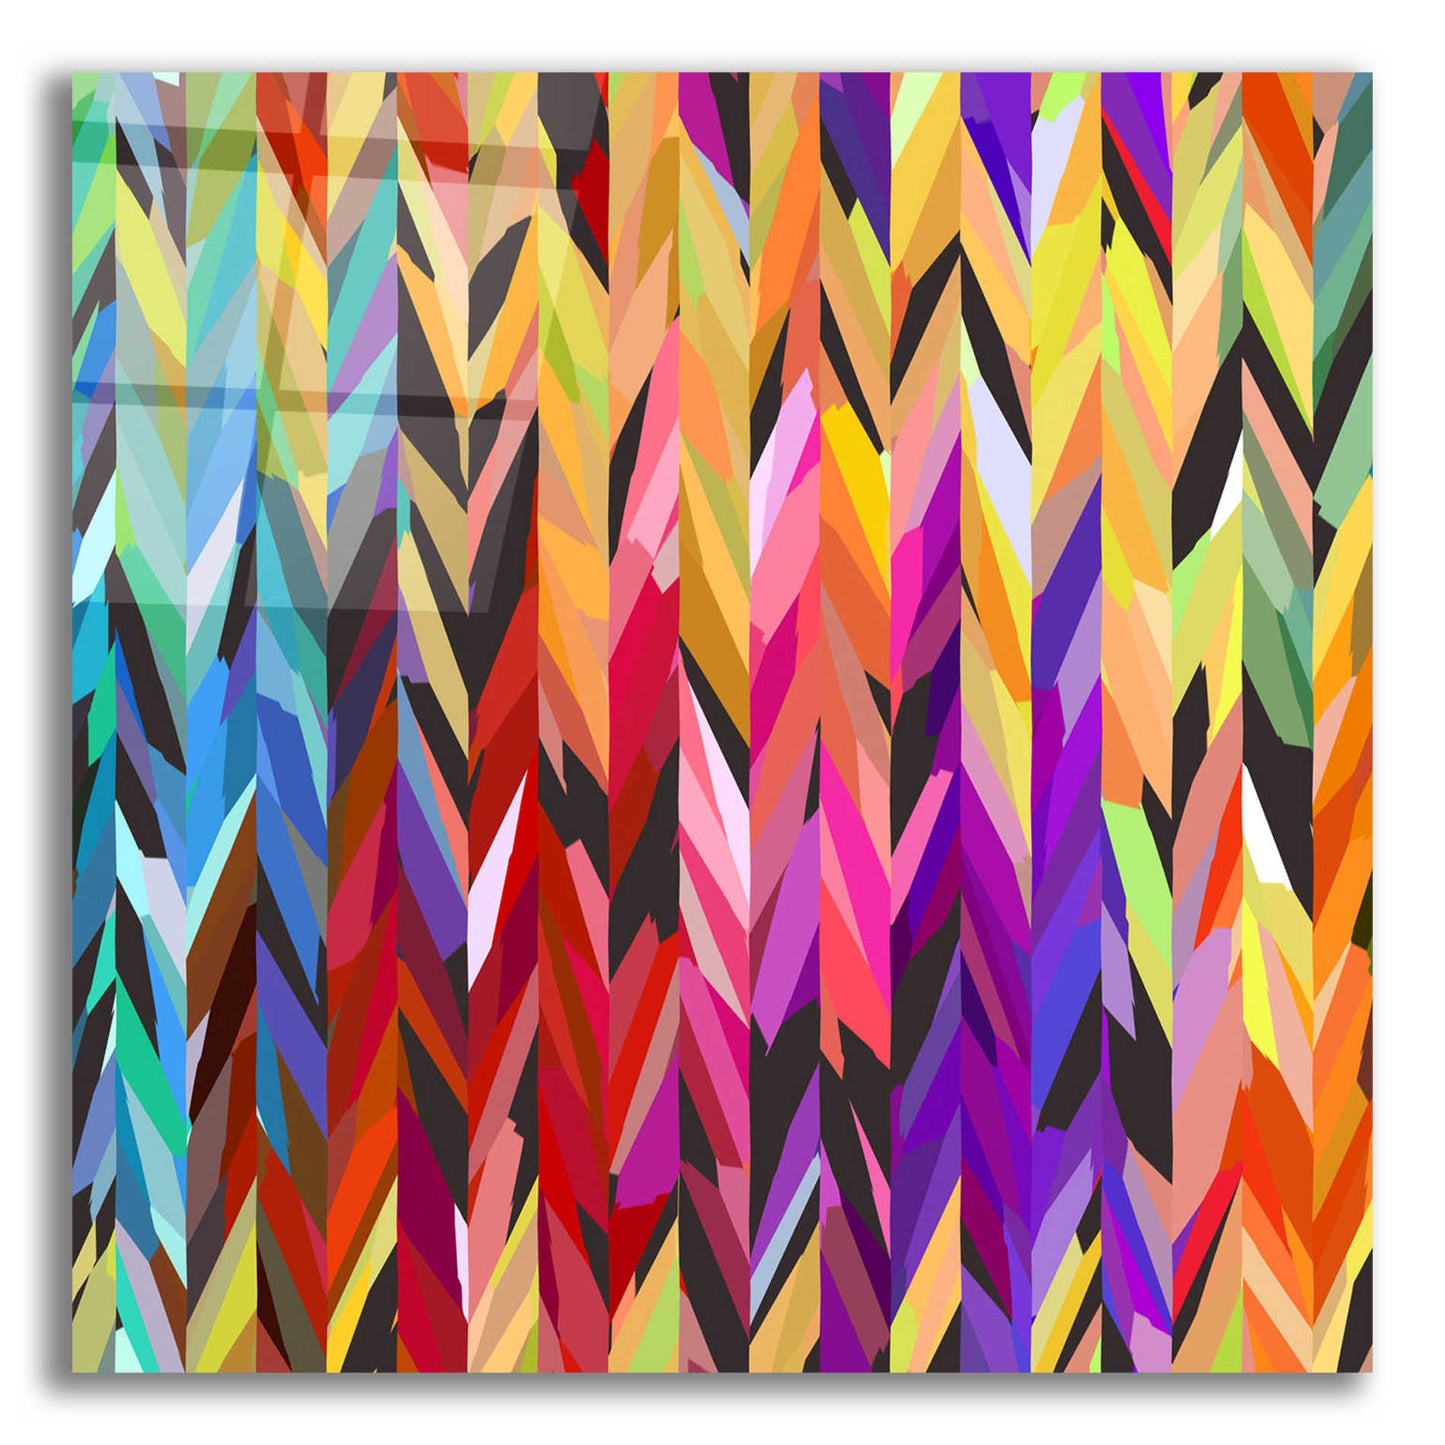 Epic Art 'Burst of Color' by Shandra Smith, Acrylic Glass Wall Art,12x12x1.1x0,18x18x1.1x0,26x26x1.74x0,37x37x1.74x0